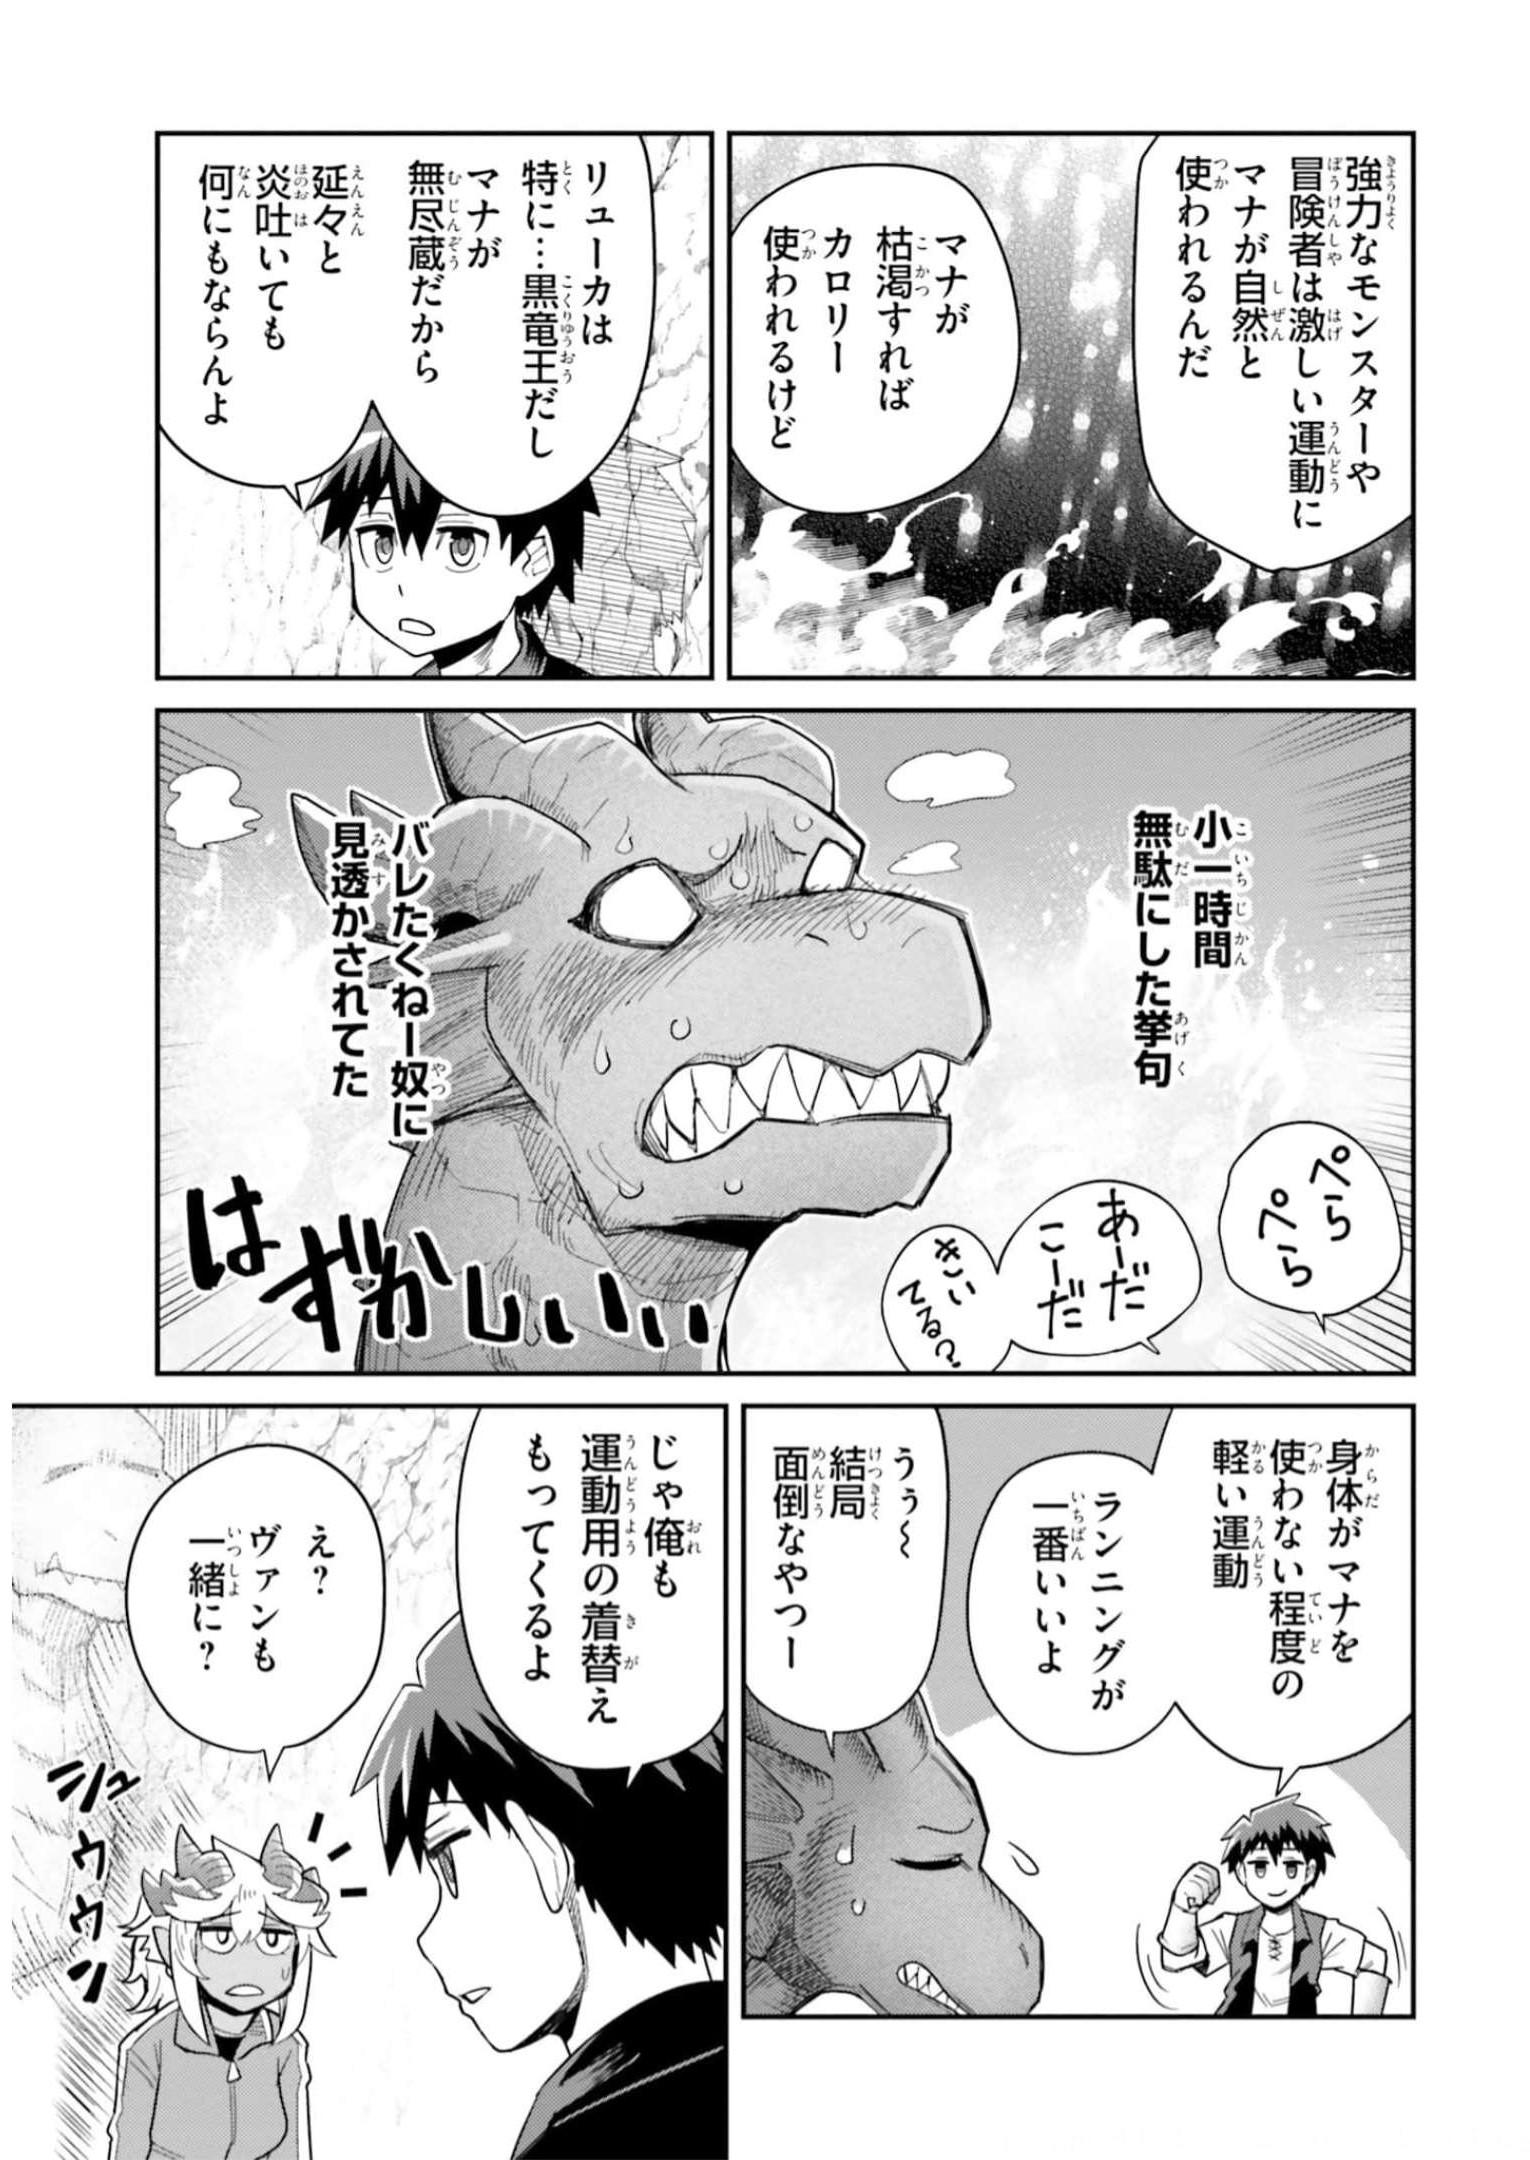 Dungeon Friends Forever Dungeon's Childhood Friend ダンジョンの幼なじみ 第24話 - Page 13